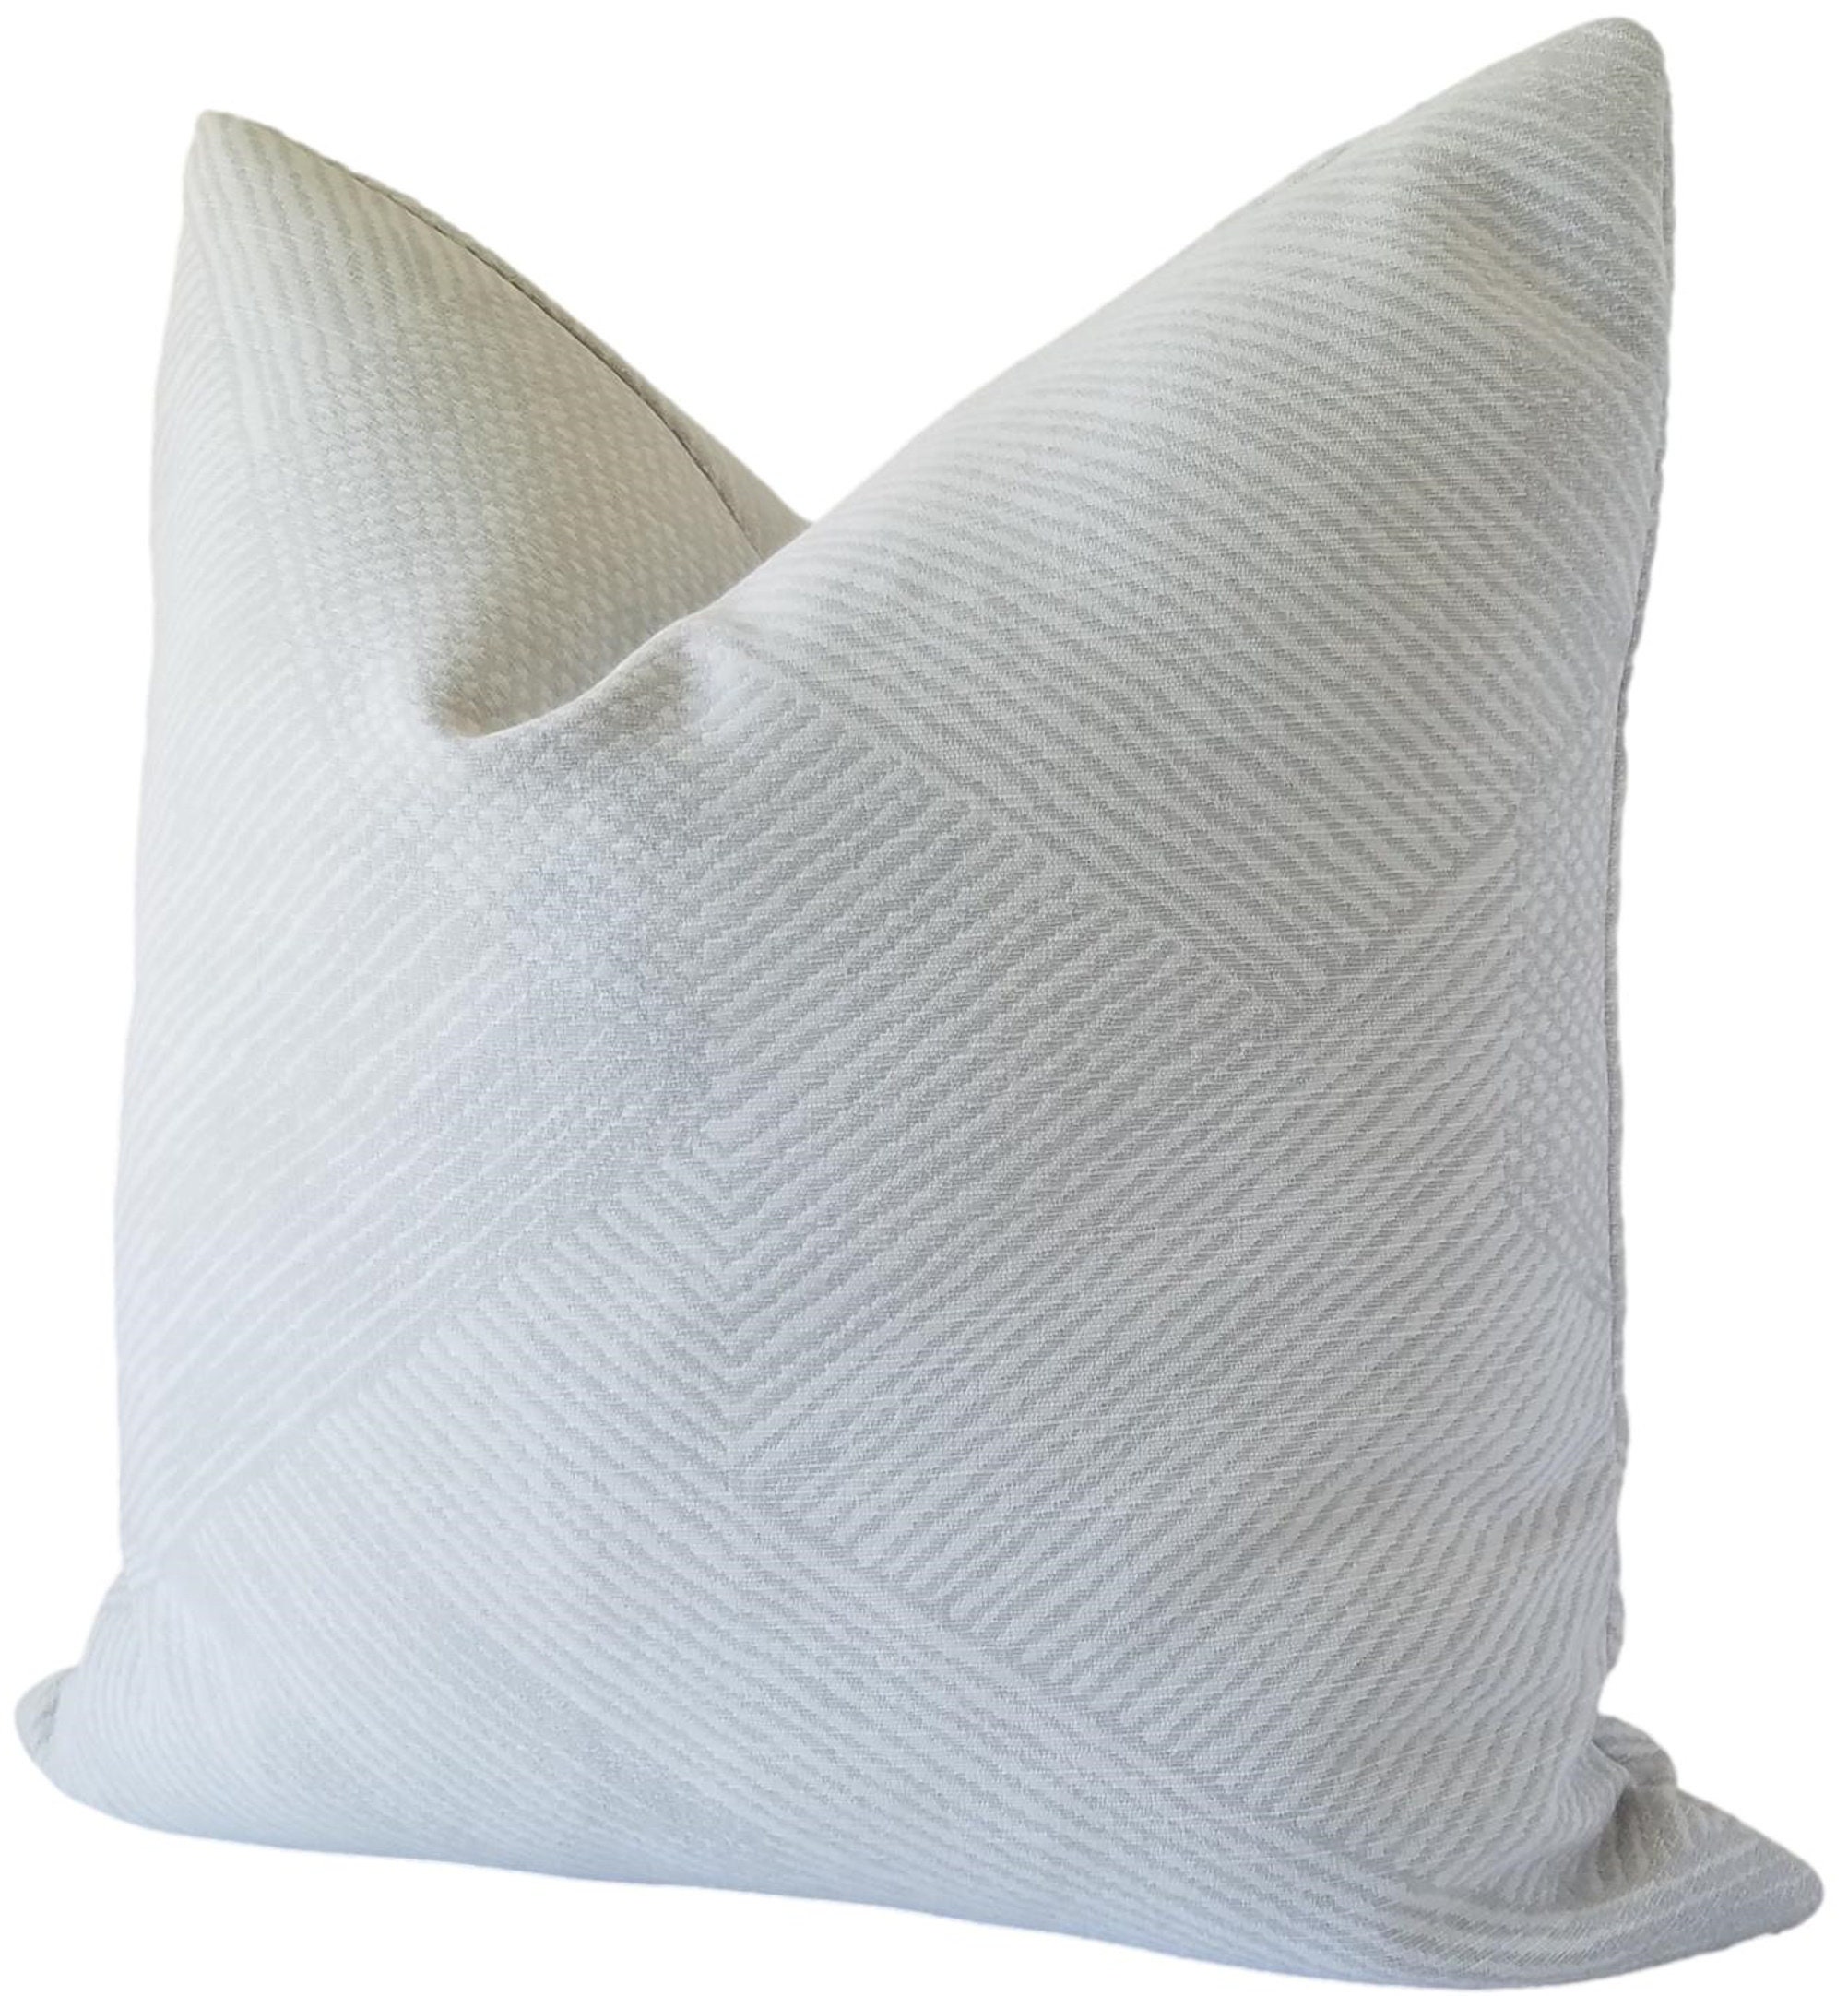 Perennials Prism in Snow Day Outdoor Pillow Cover White 